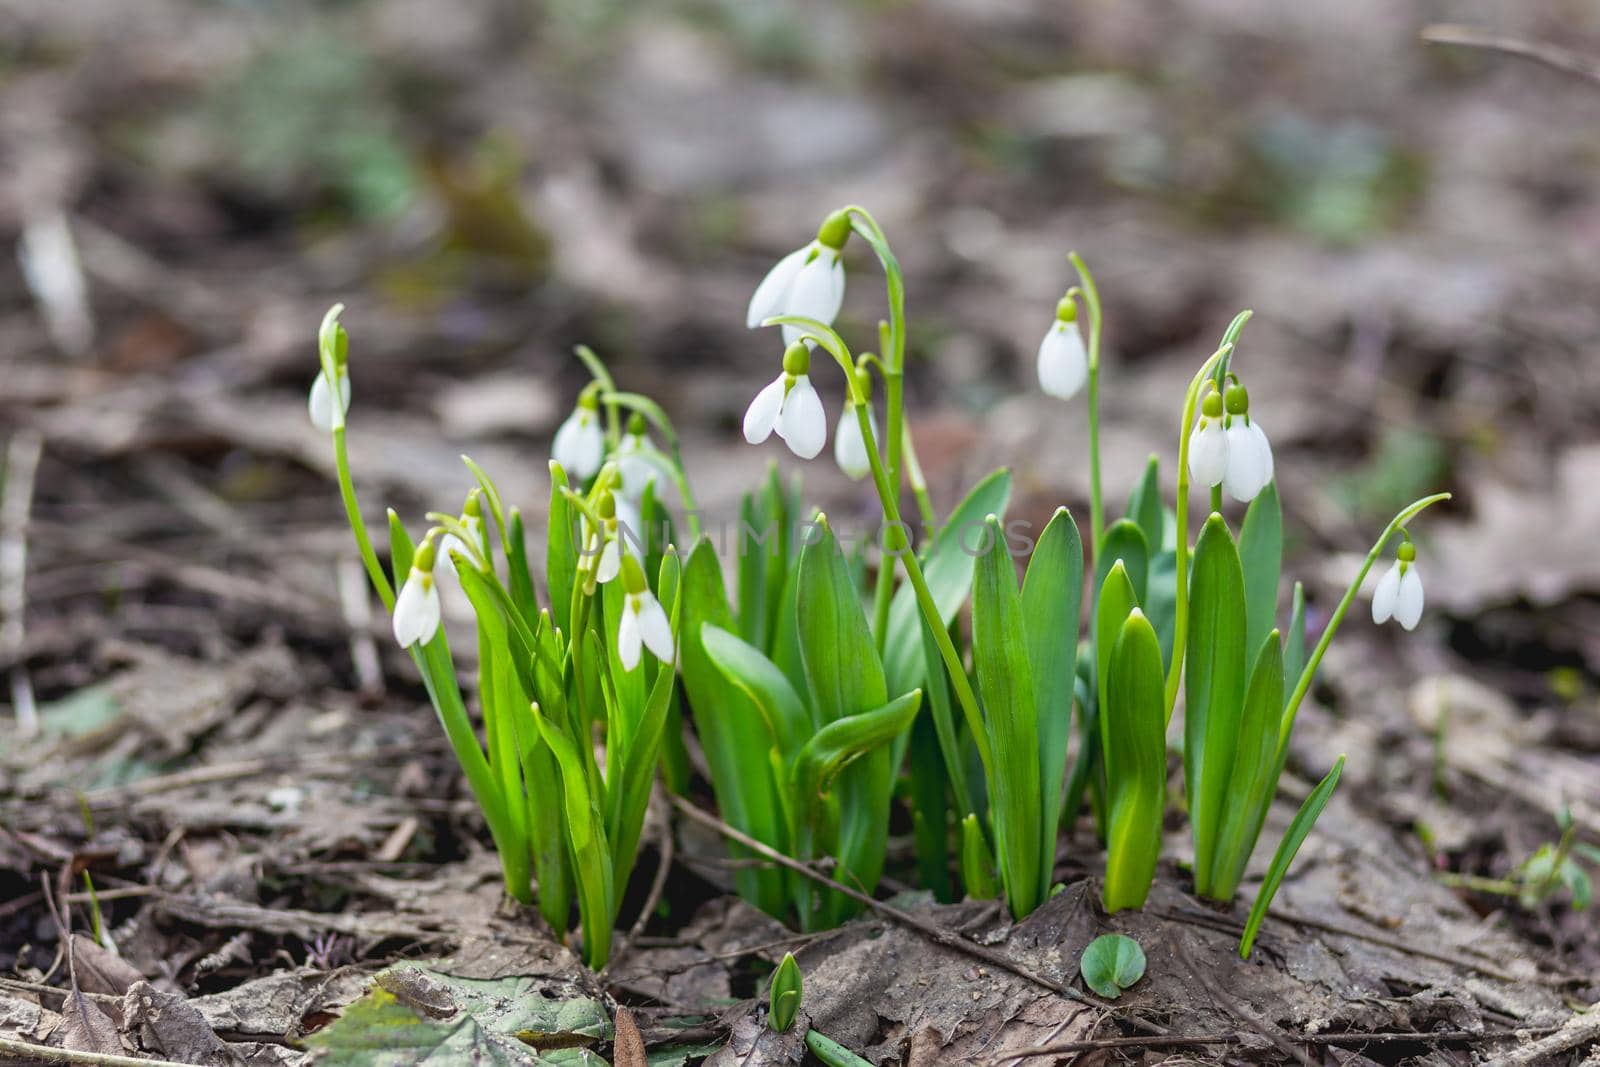 Snowdrops makes its way through snow and fallen leaves. First spring flowers in bloom - Galanthus.